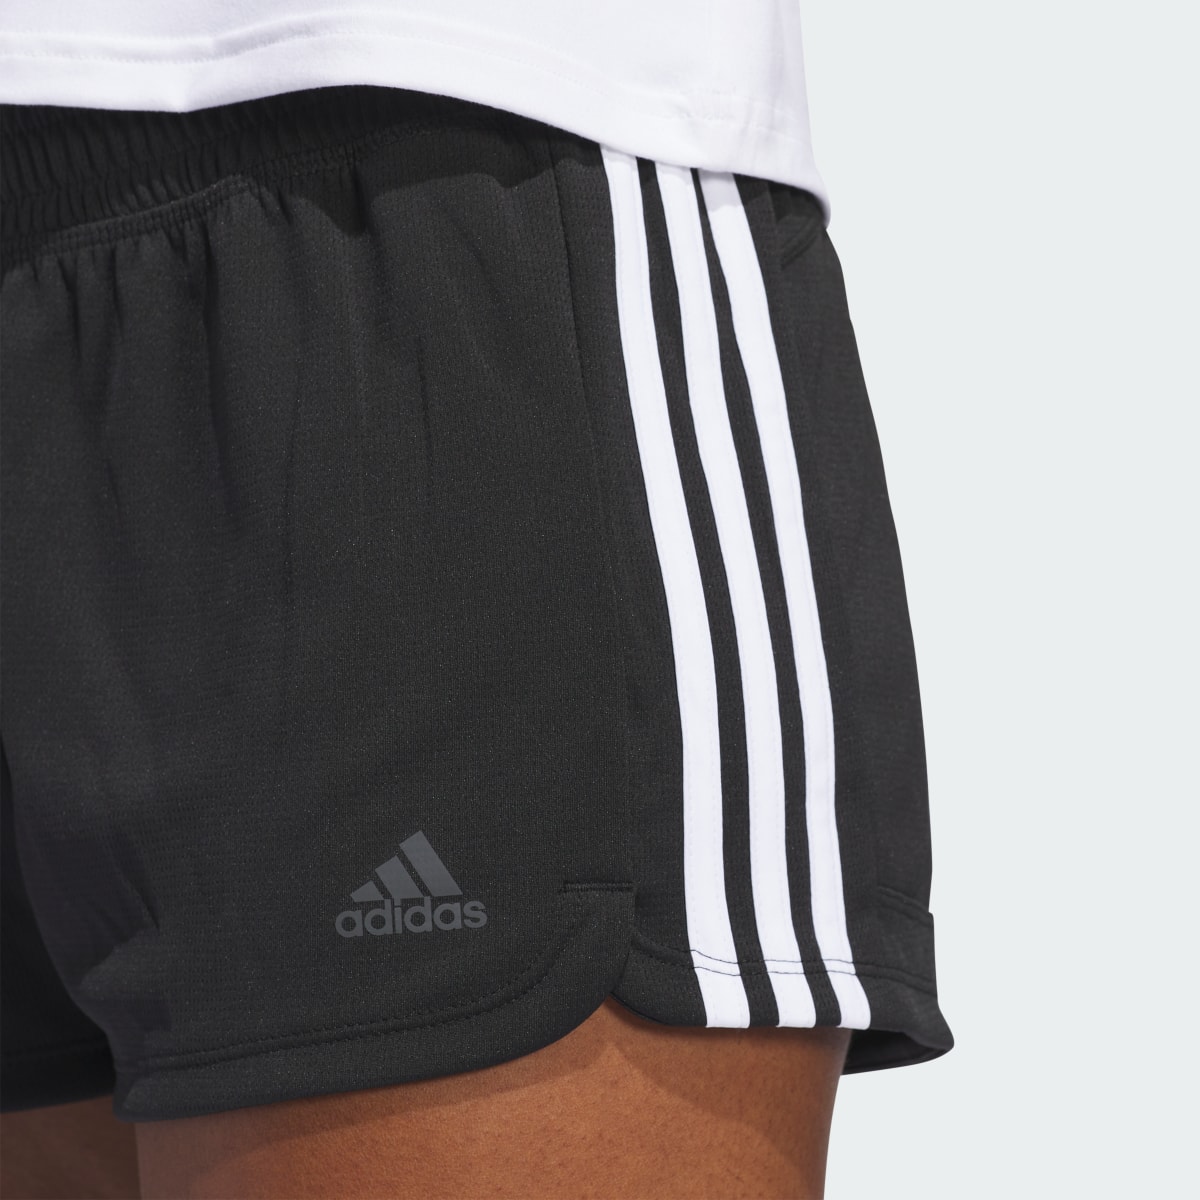 Adidas Pacer 3-Stripes Knit Shorts. 6